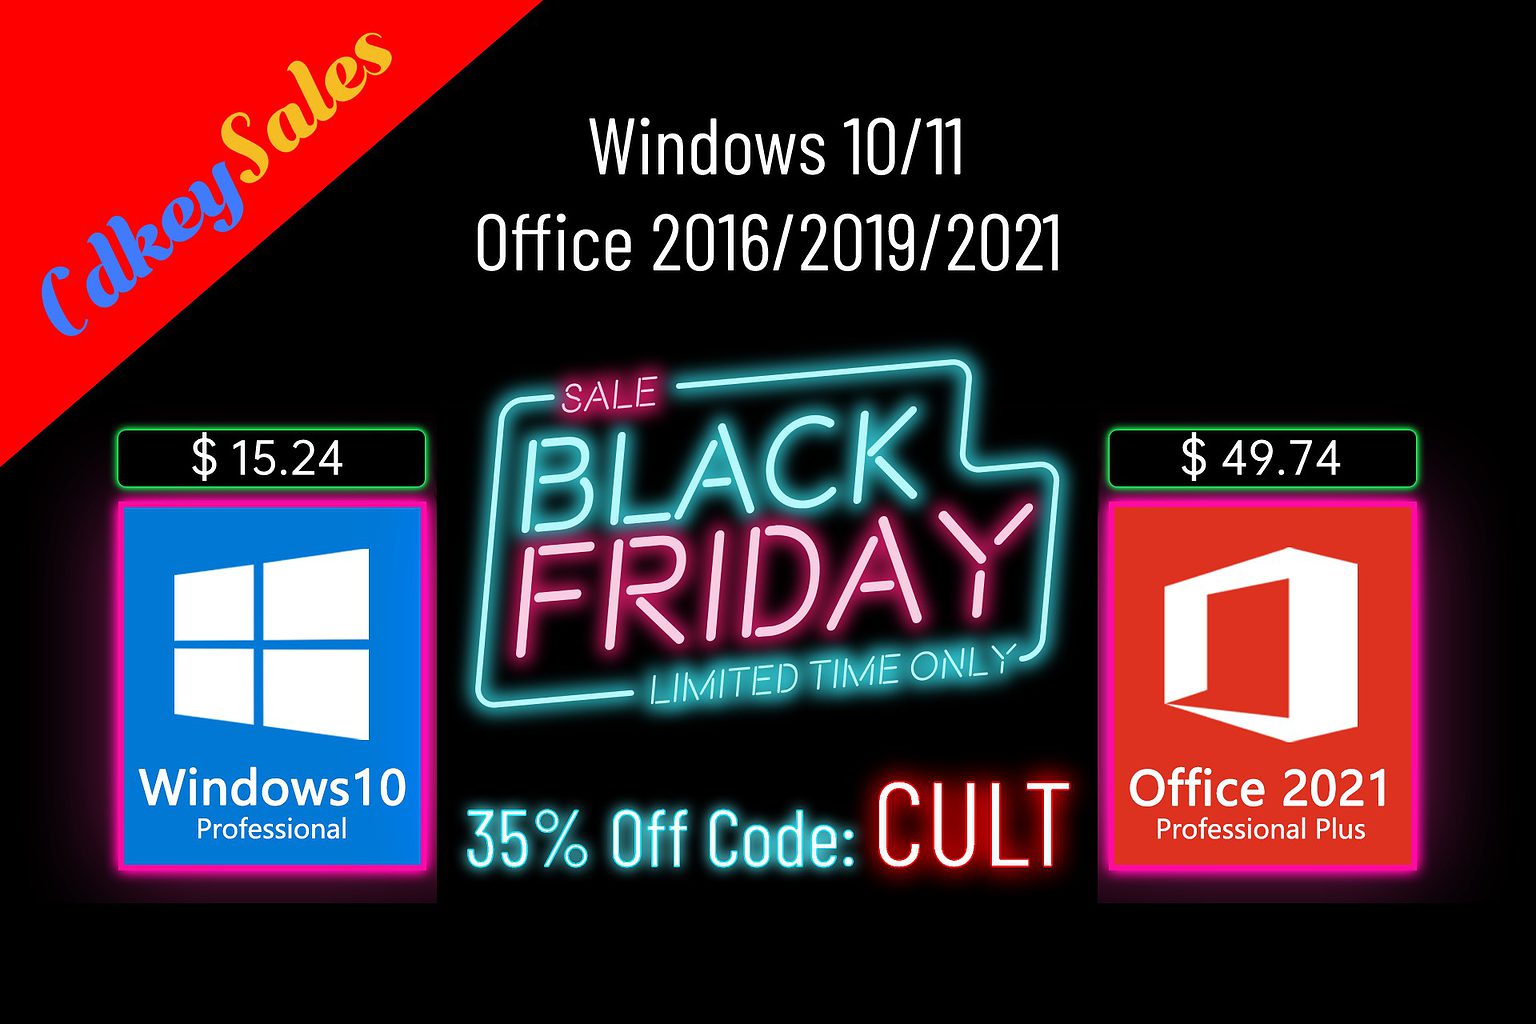 Get great deals on Microsoft software by using promo code CULT at CdkeySales.com.